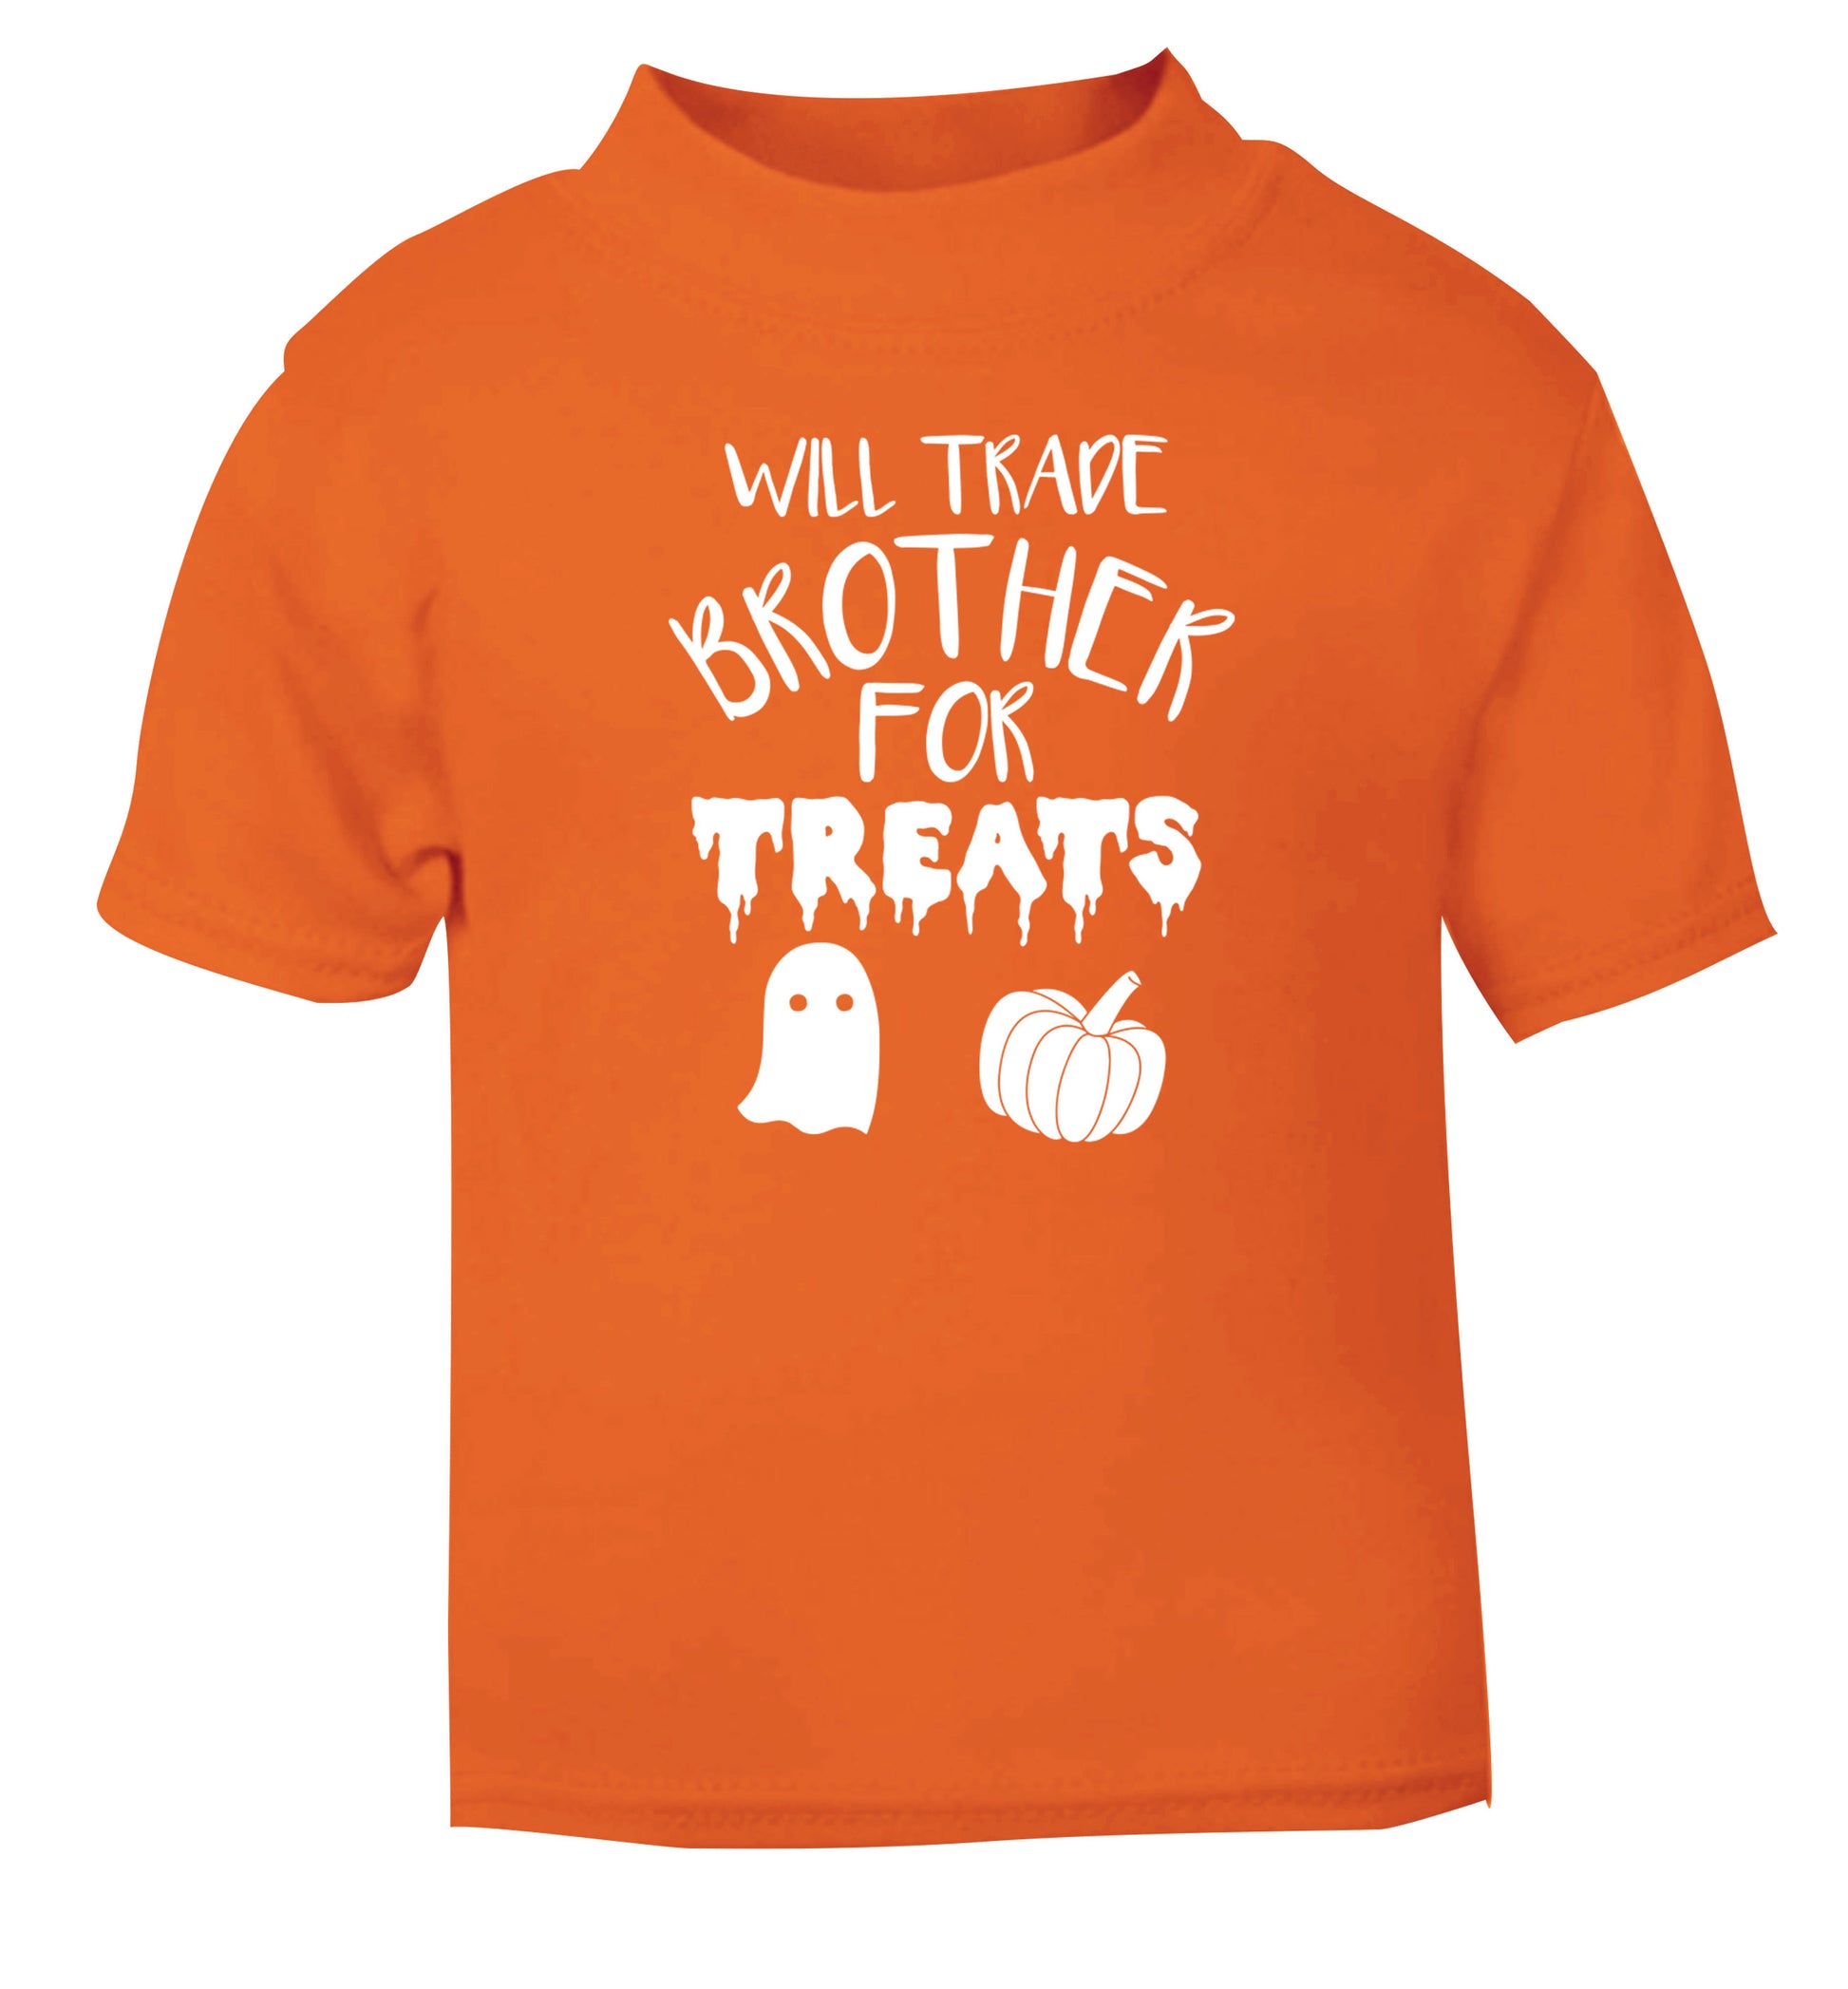 Will trade brother for treats orange Baby Toddler Tshirt 2 Years